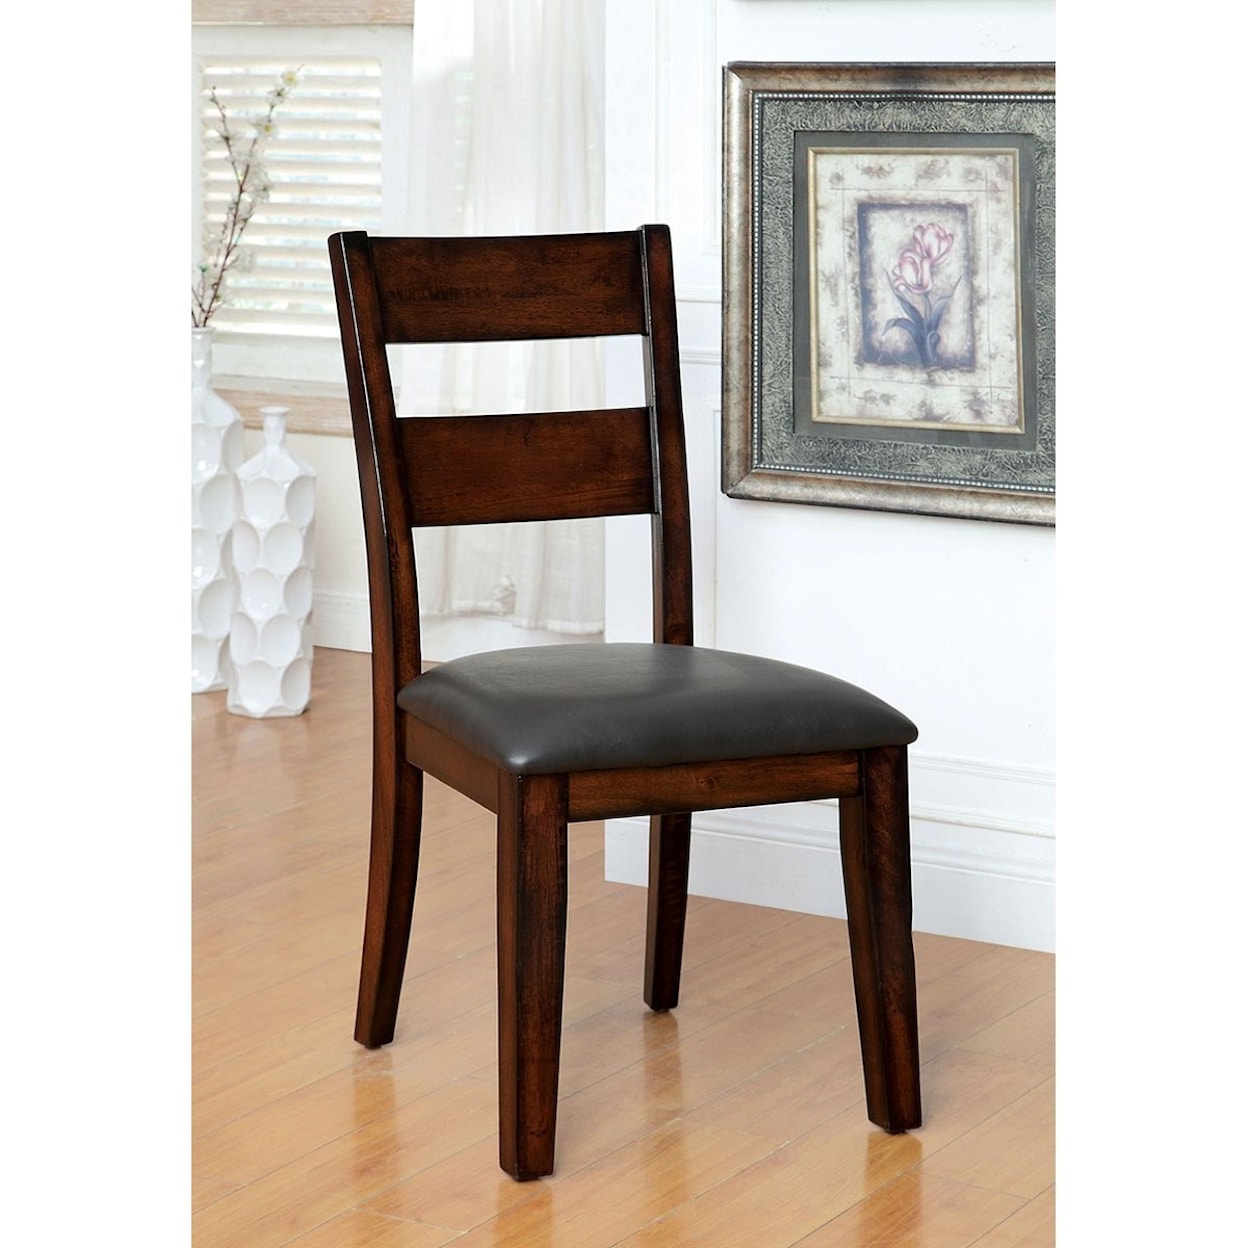 FUSA Dickinson Set of Two Side Chairs